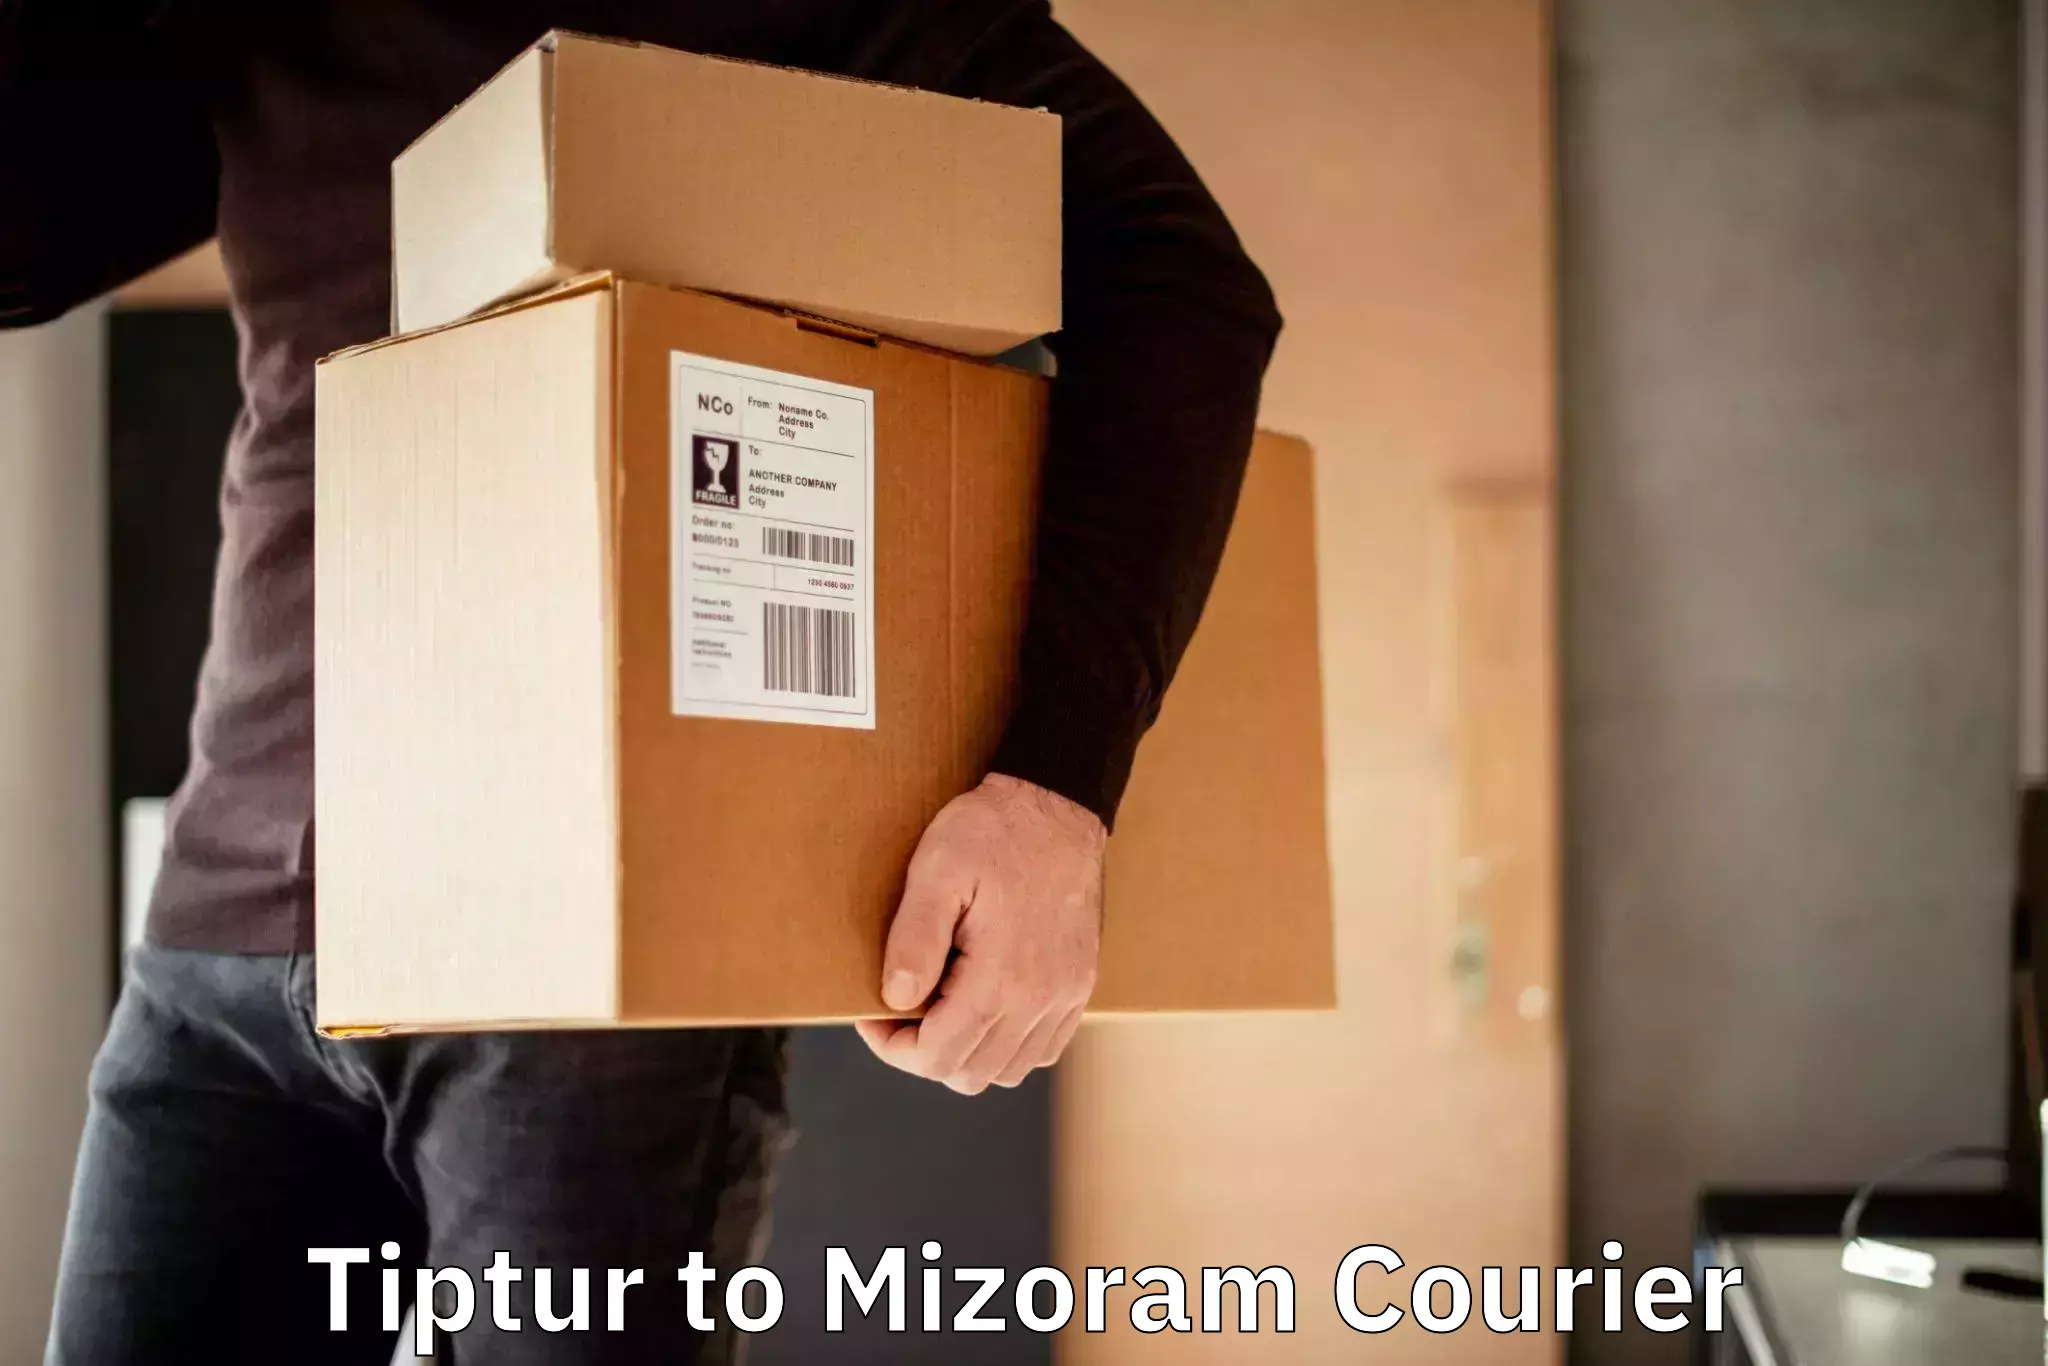 On-call courier service Tiptur to Mizoram